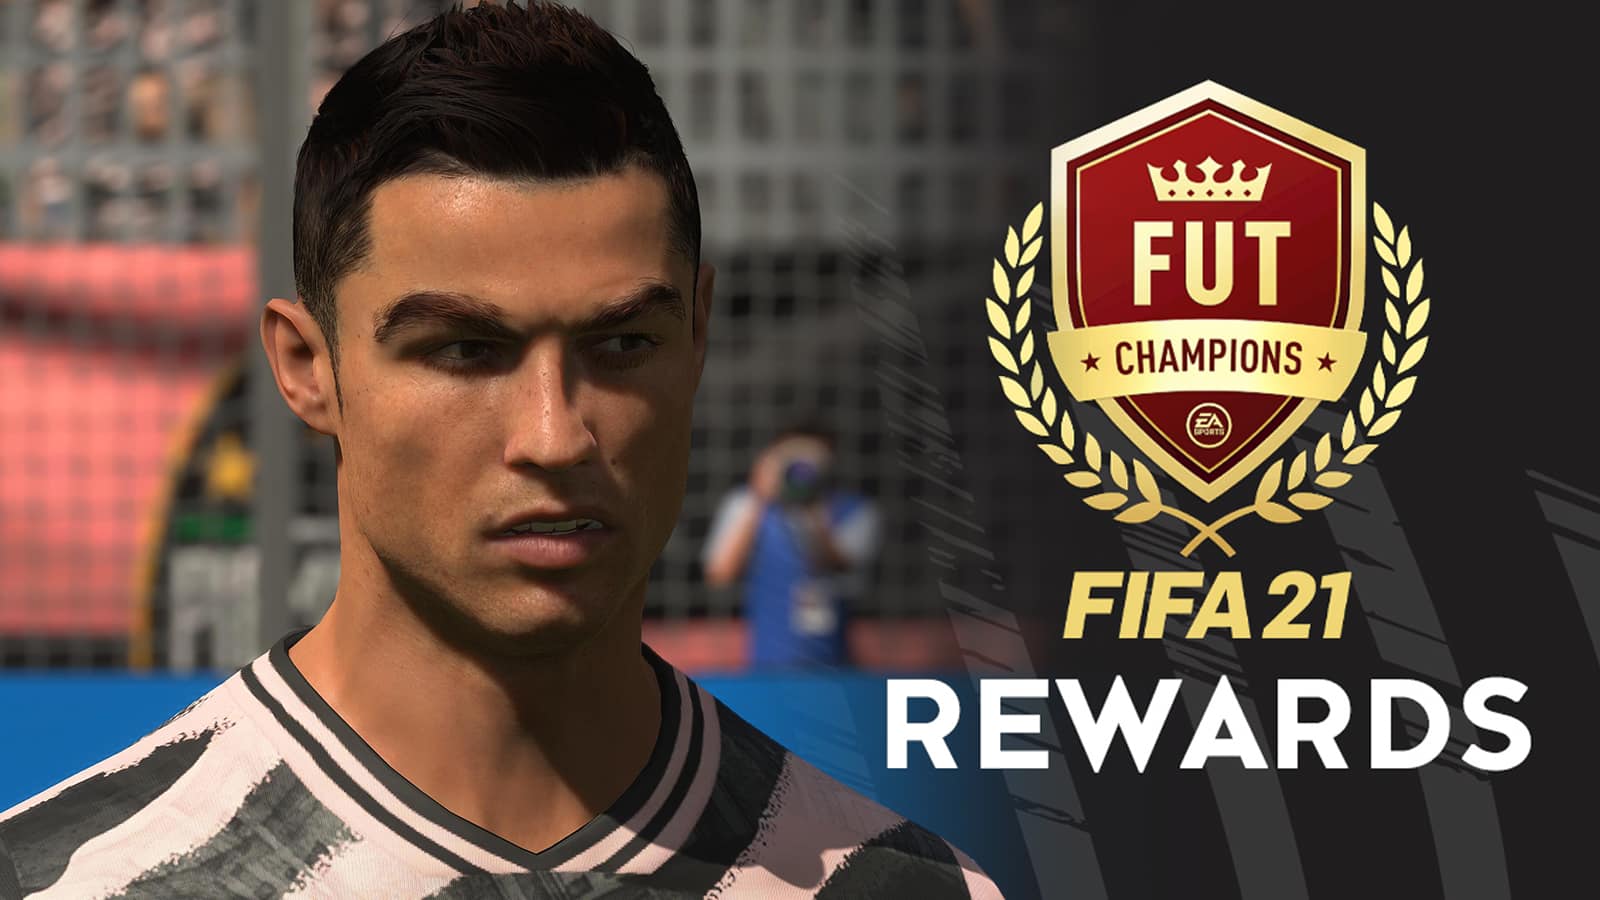 Cristiano Ronaldo in new TOTS Team of the Season replacing TOTW cards in FUT Champs Weekend League rewards.